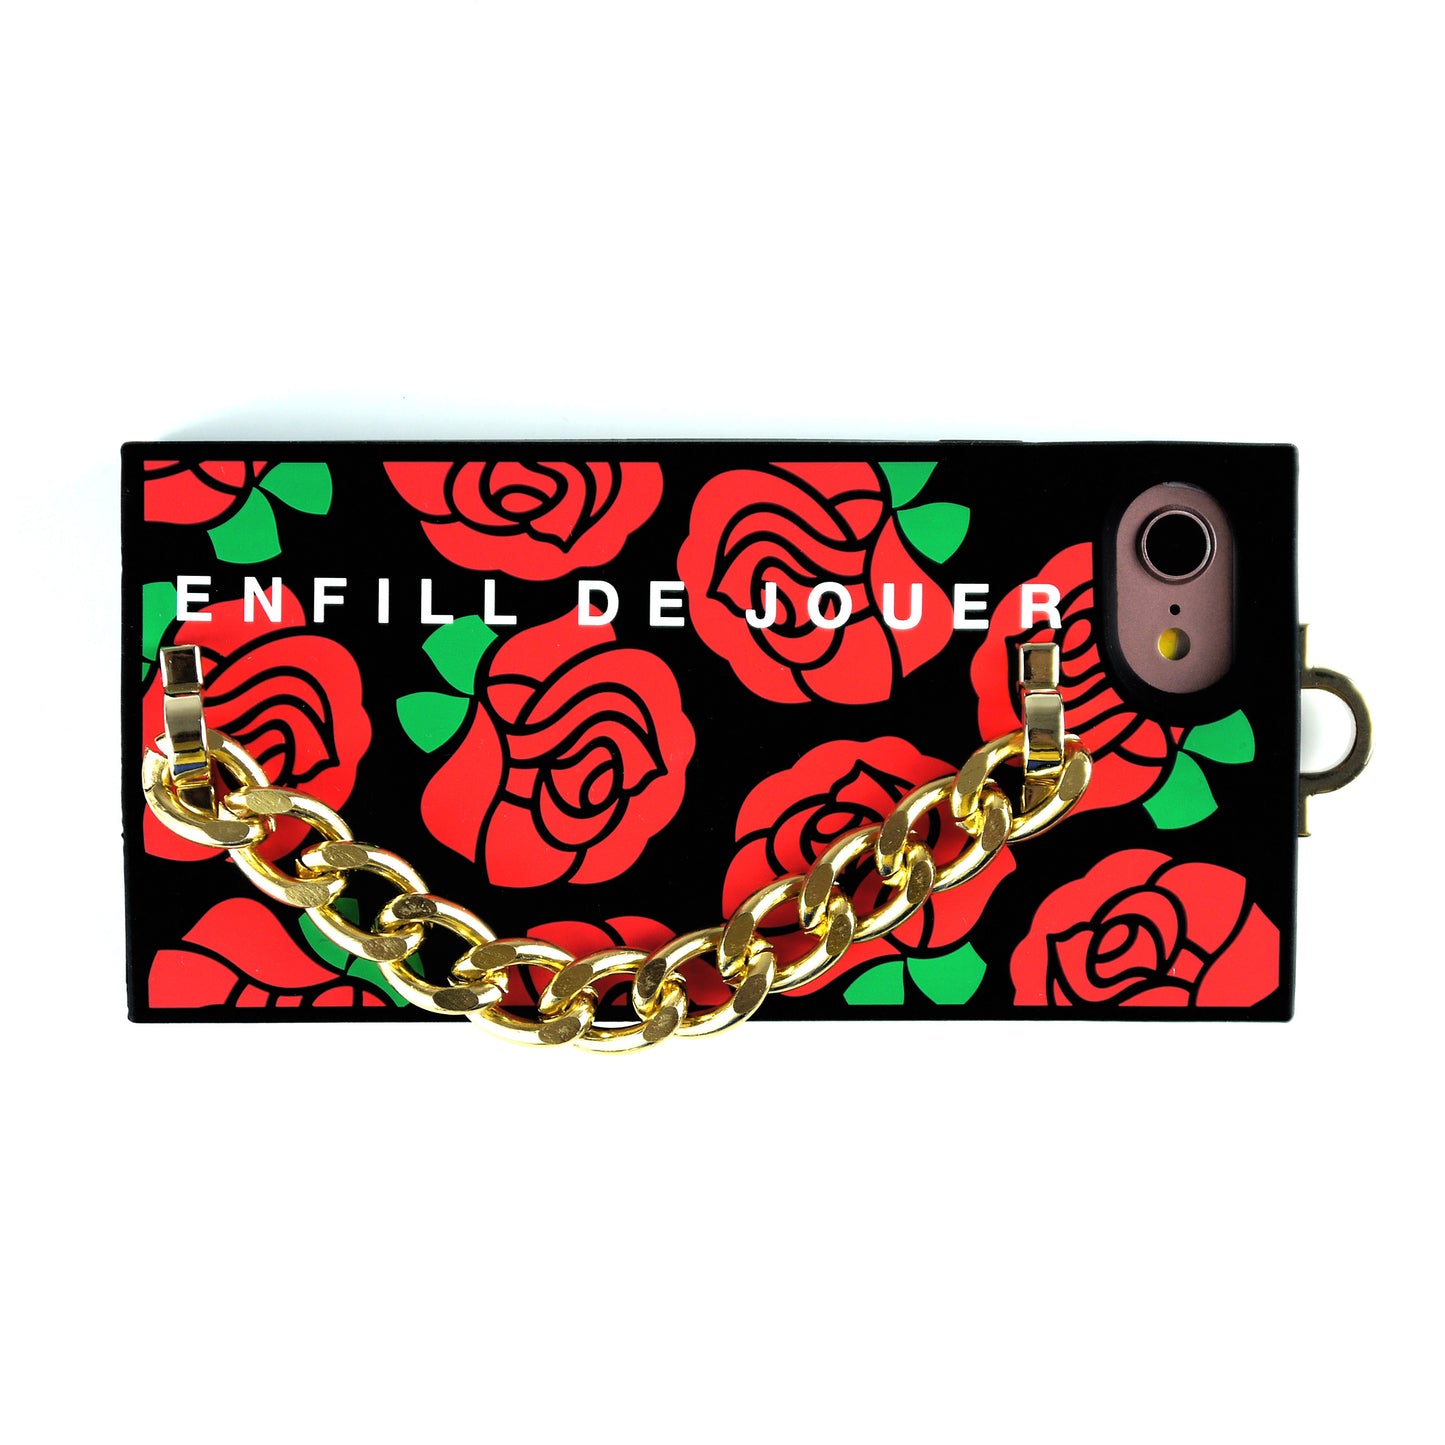 iPhone SE/7/8 Red Rose Chain Case